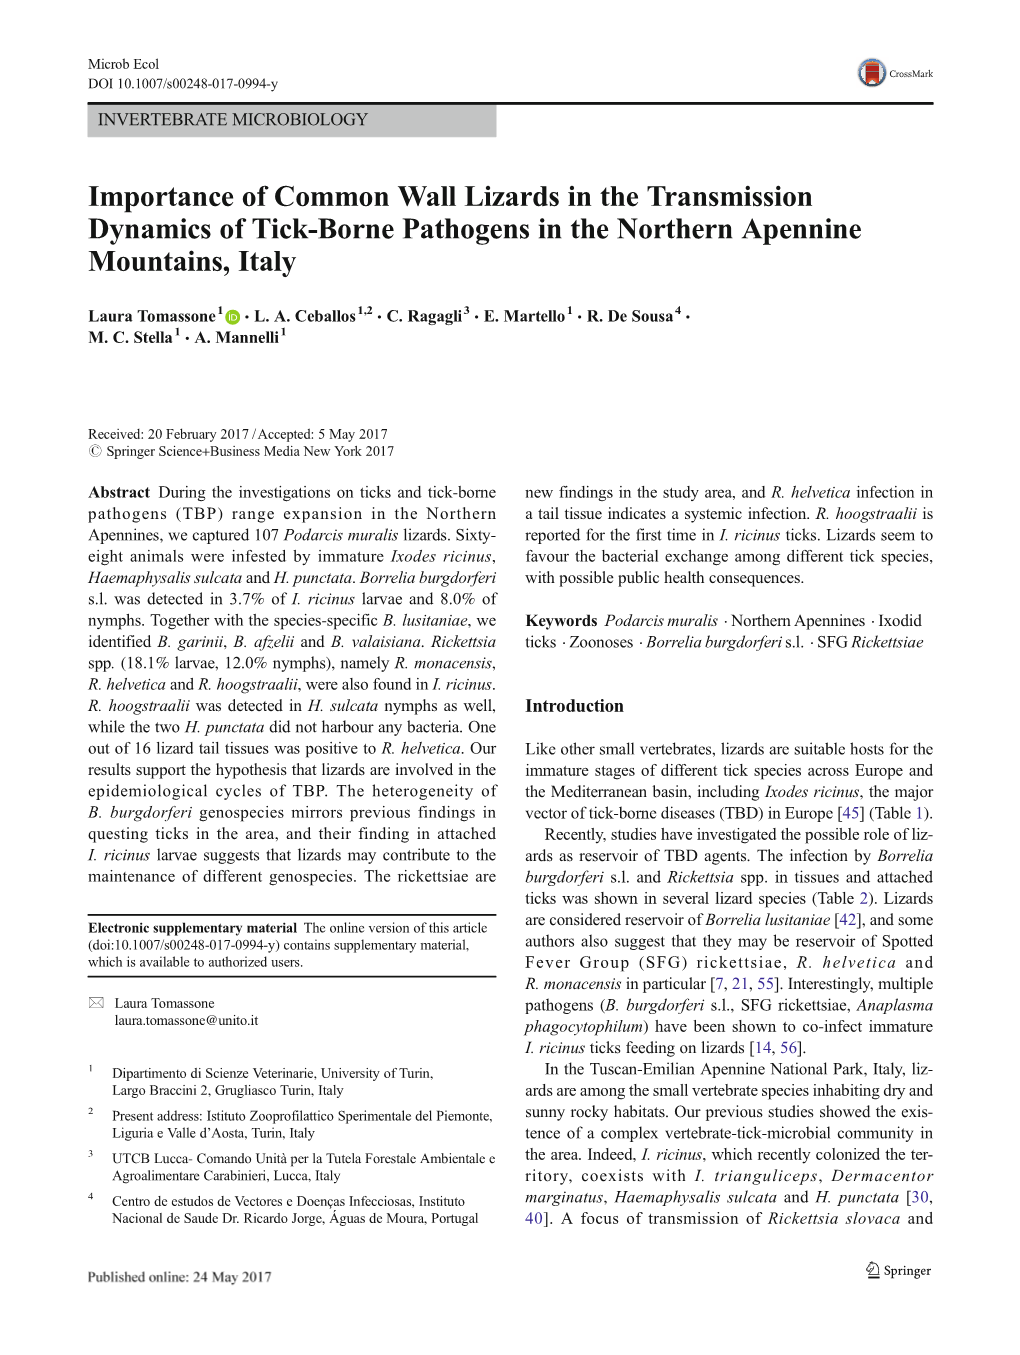 Importance of Common Wall Lizards in the Transmission Dynamics of Tick-Borne Pathogens in the Northern Apennine Mountains, Italy